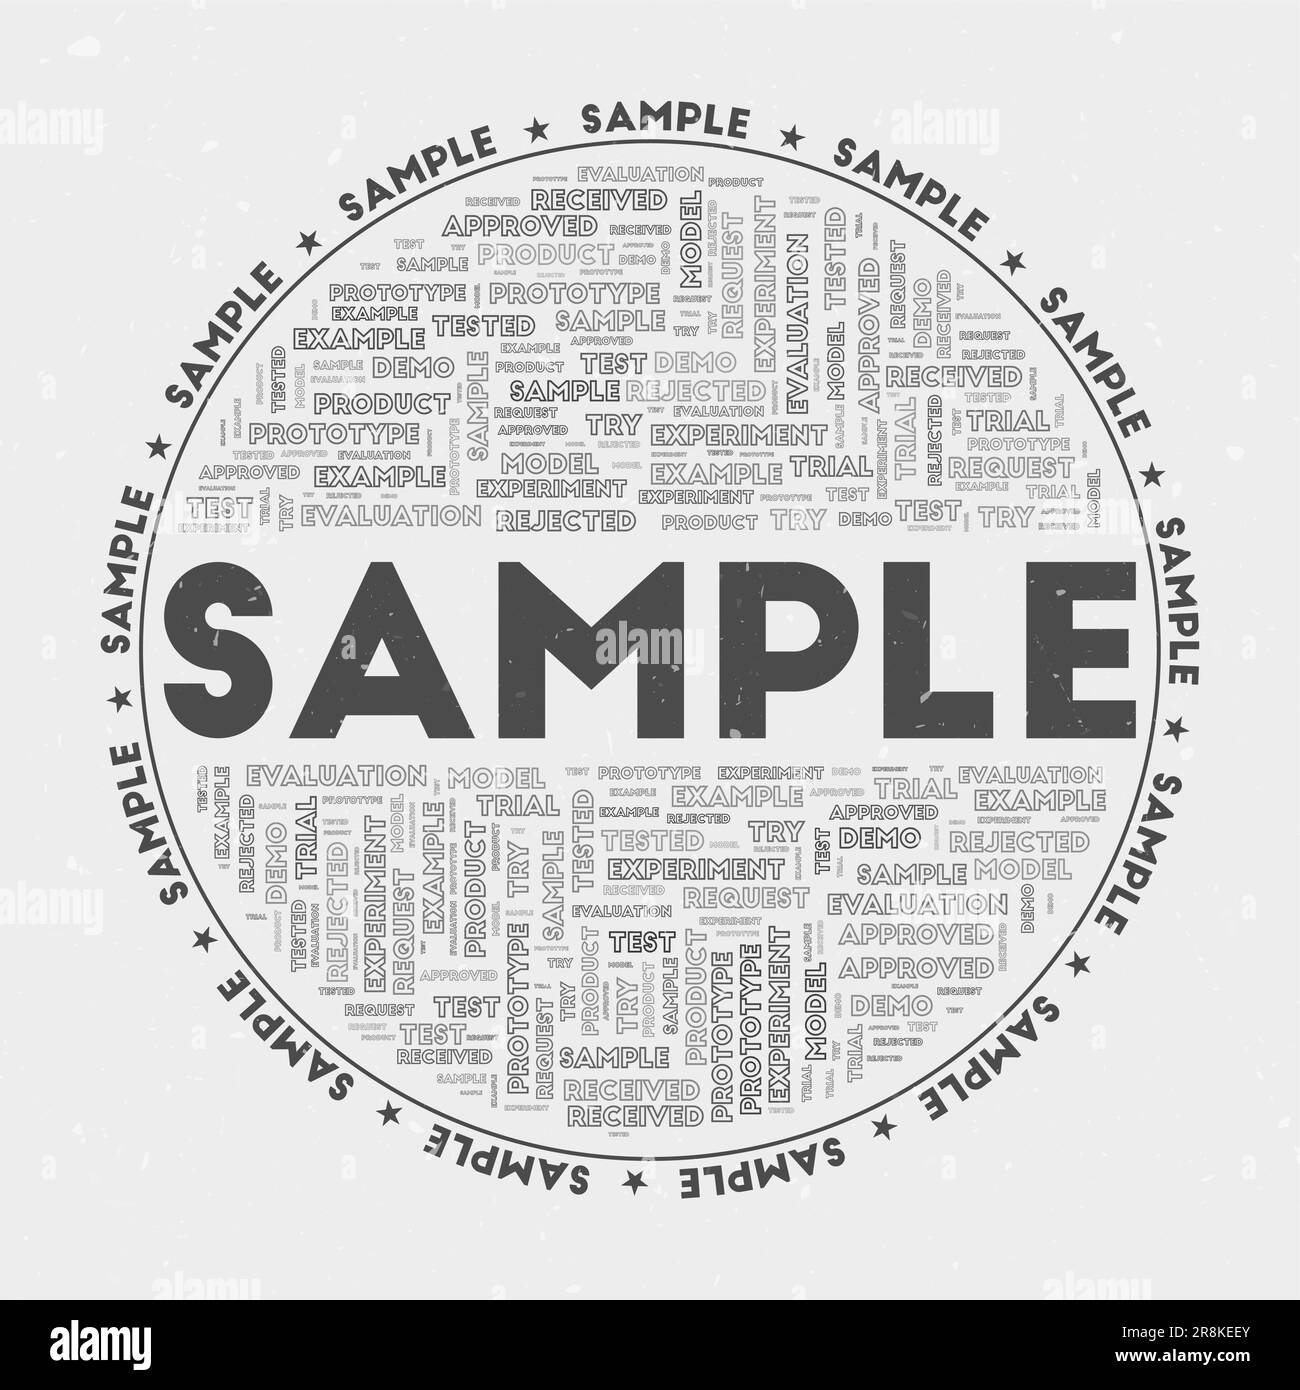 Sample - round badge. Text sample with keywords word clouds and circular text. Shady Character color theme and grunge texture. Stylish vector illustra Stock Vector